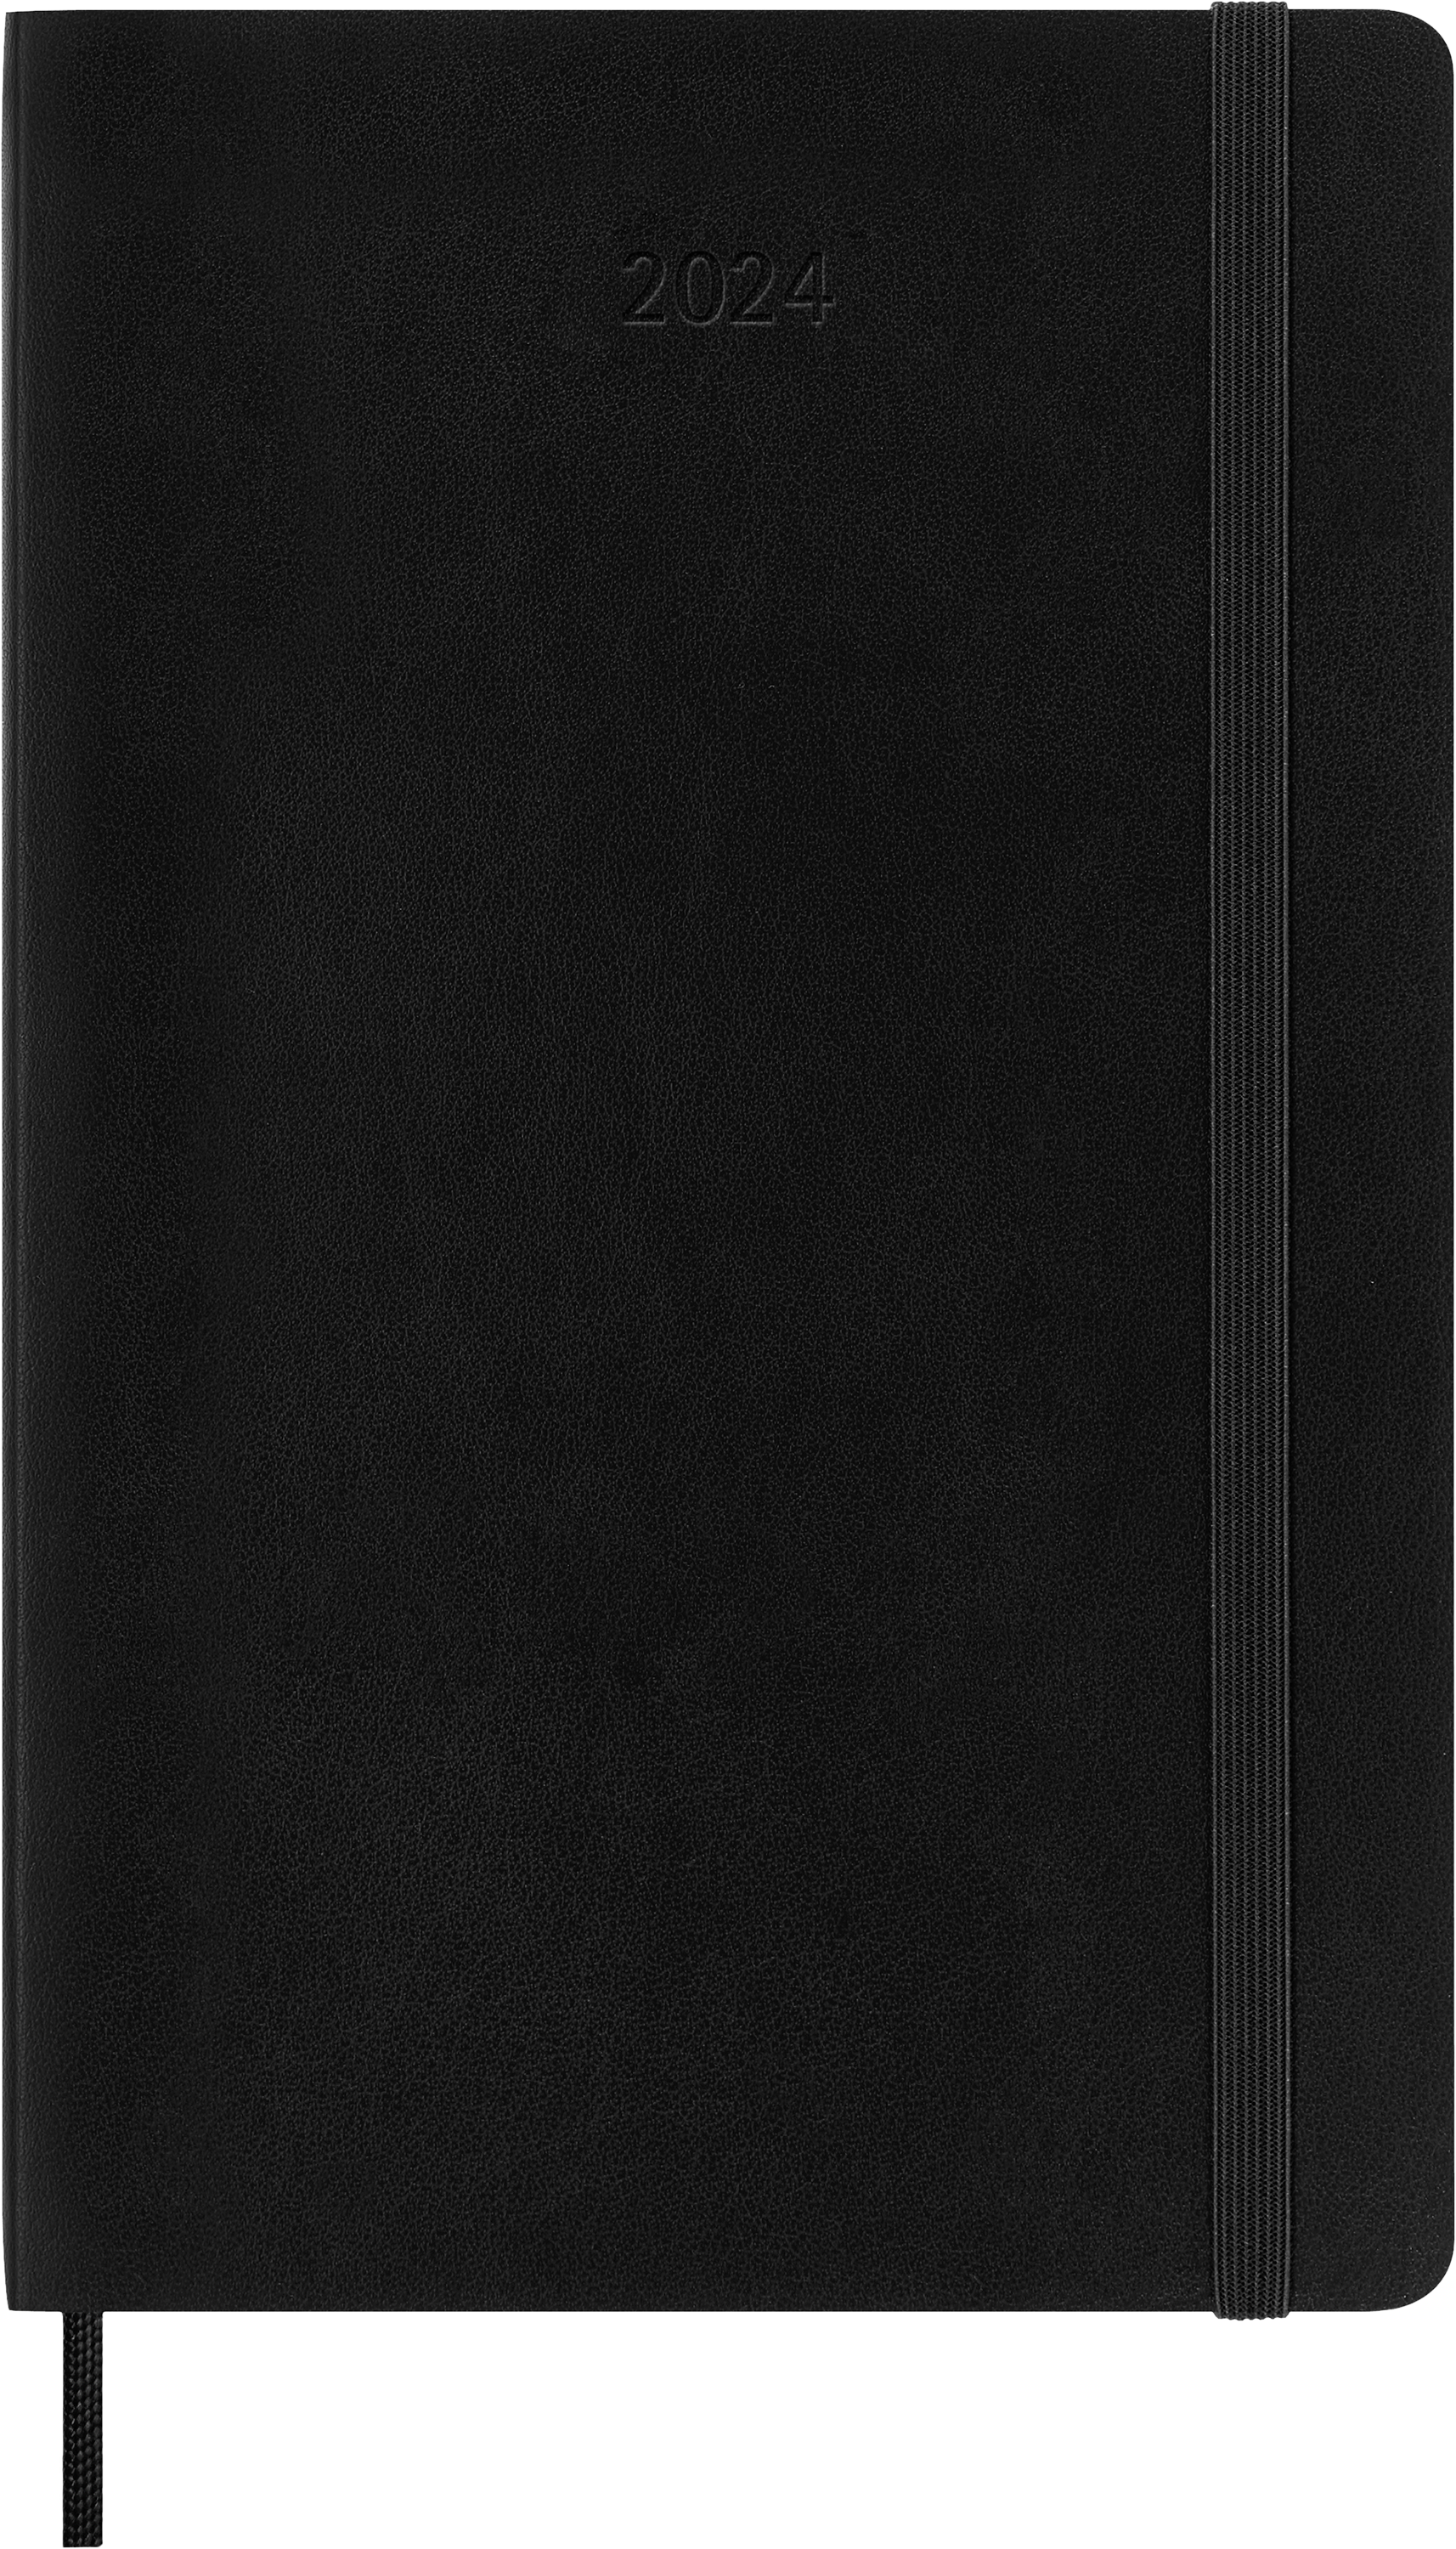 Moleskine 2024 Diary Softcover large week